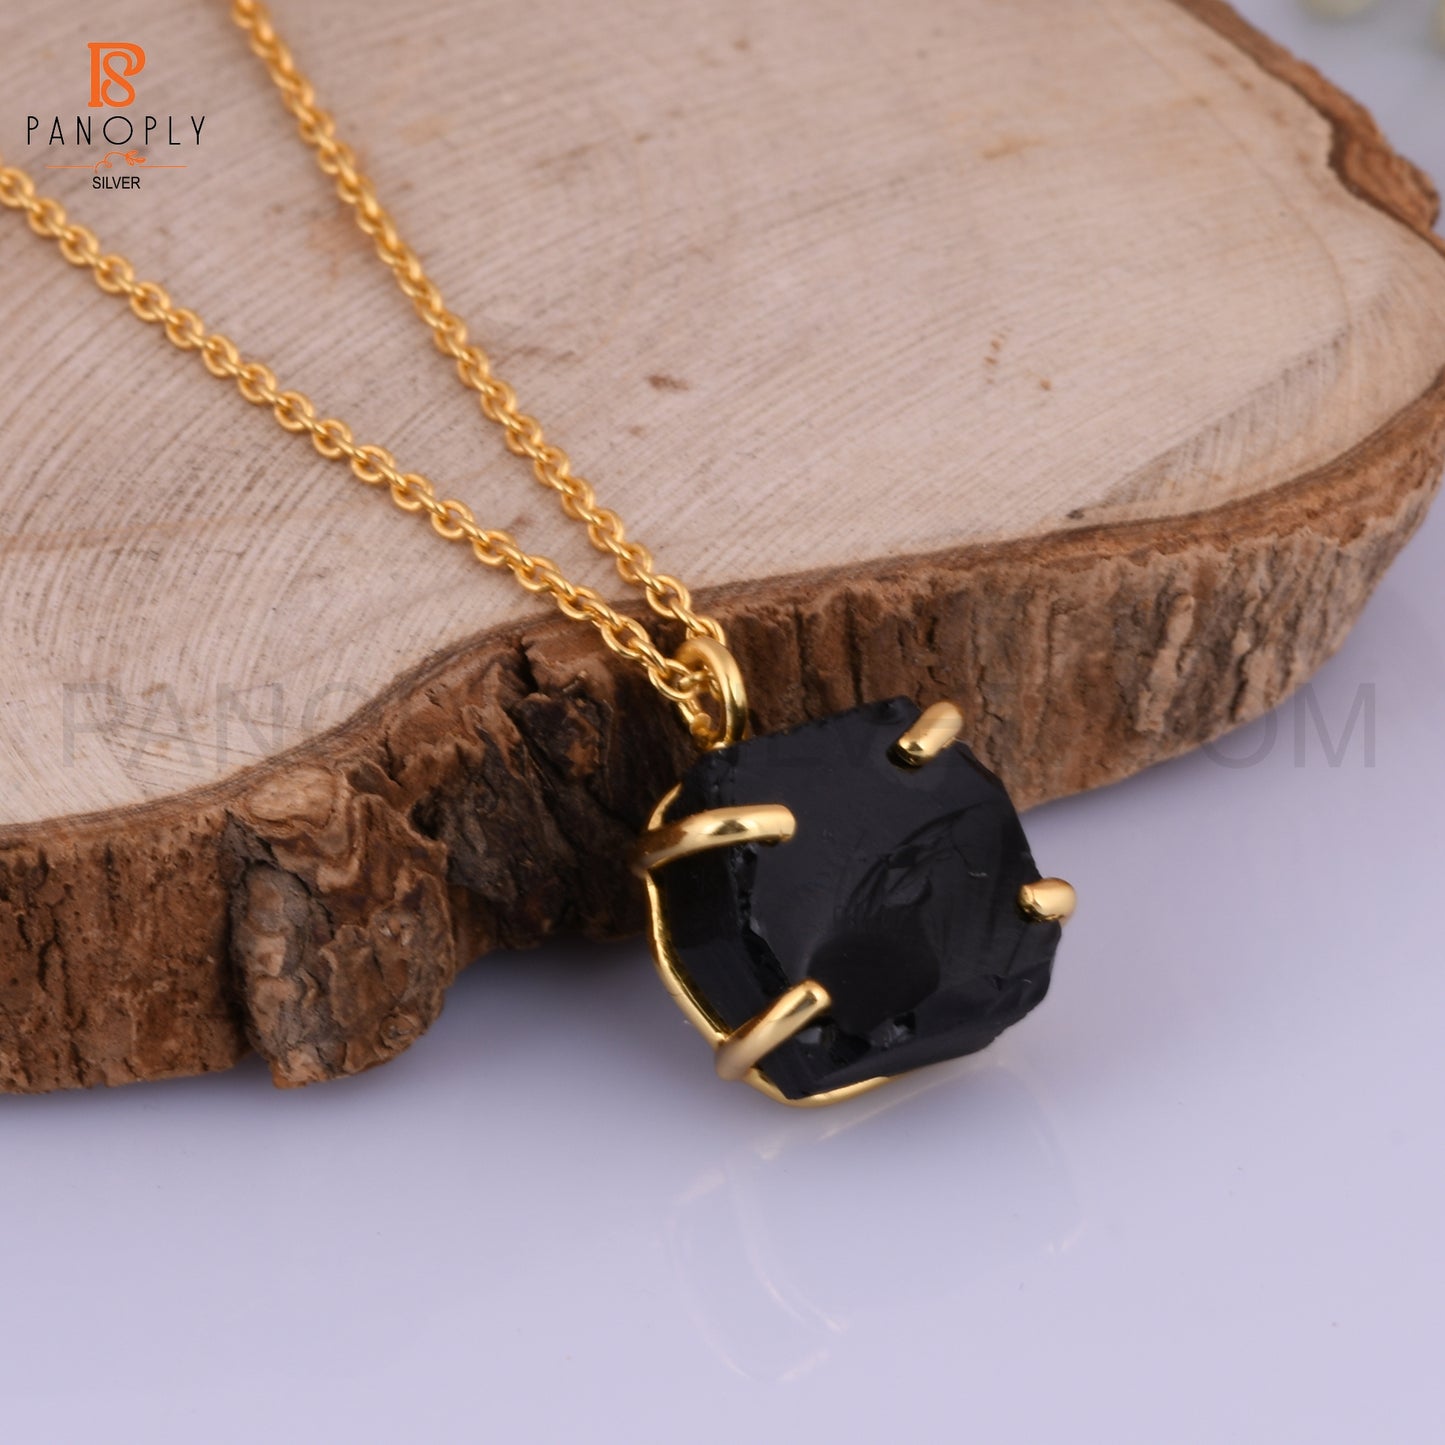 Black Obsidian Rough Cut Gold Plated 925 Silver Pendant Chain